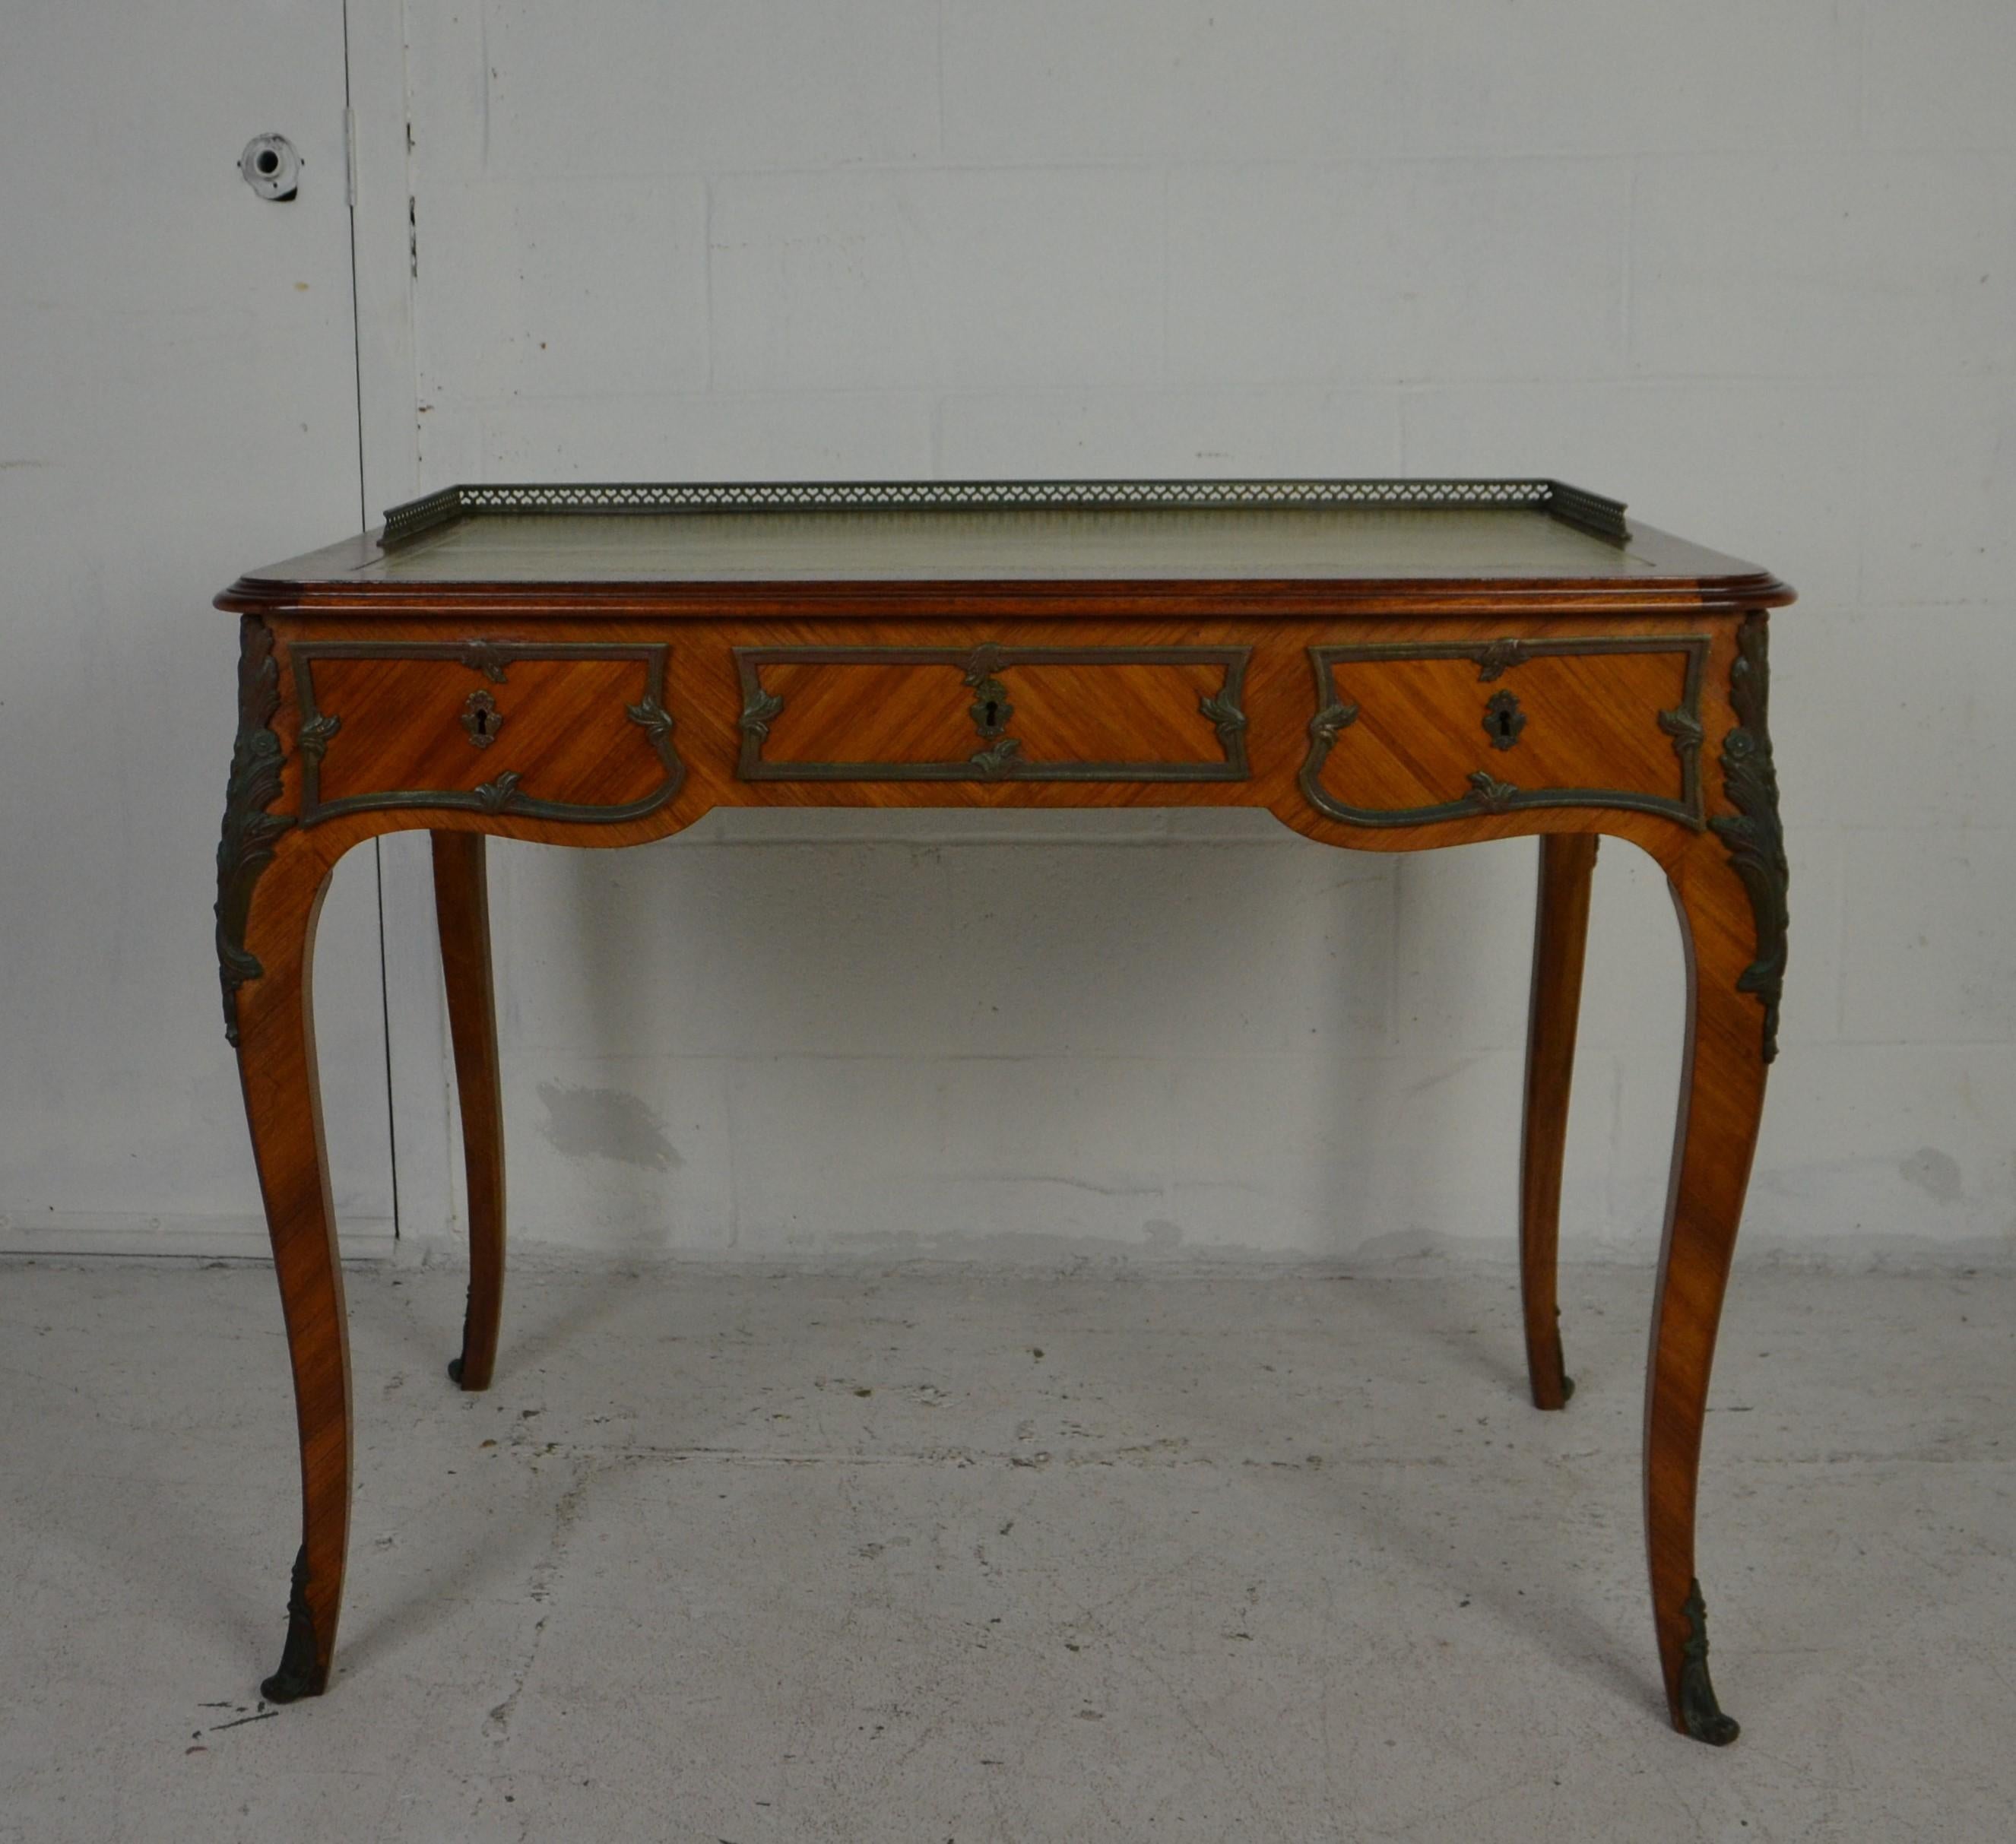 A genuine French Louis XV style desk / bureau plat in a small size. Ideal for a ladies desk. King-wood with 3 drawers and featuring a fretwork brass gallery to the top. Inset with tooled leather top. Decorated with bronze around the drawers, legs